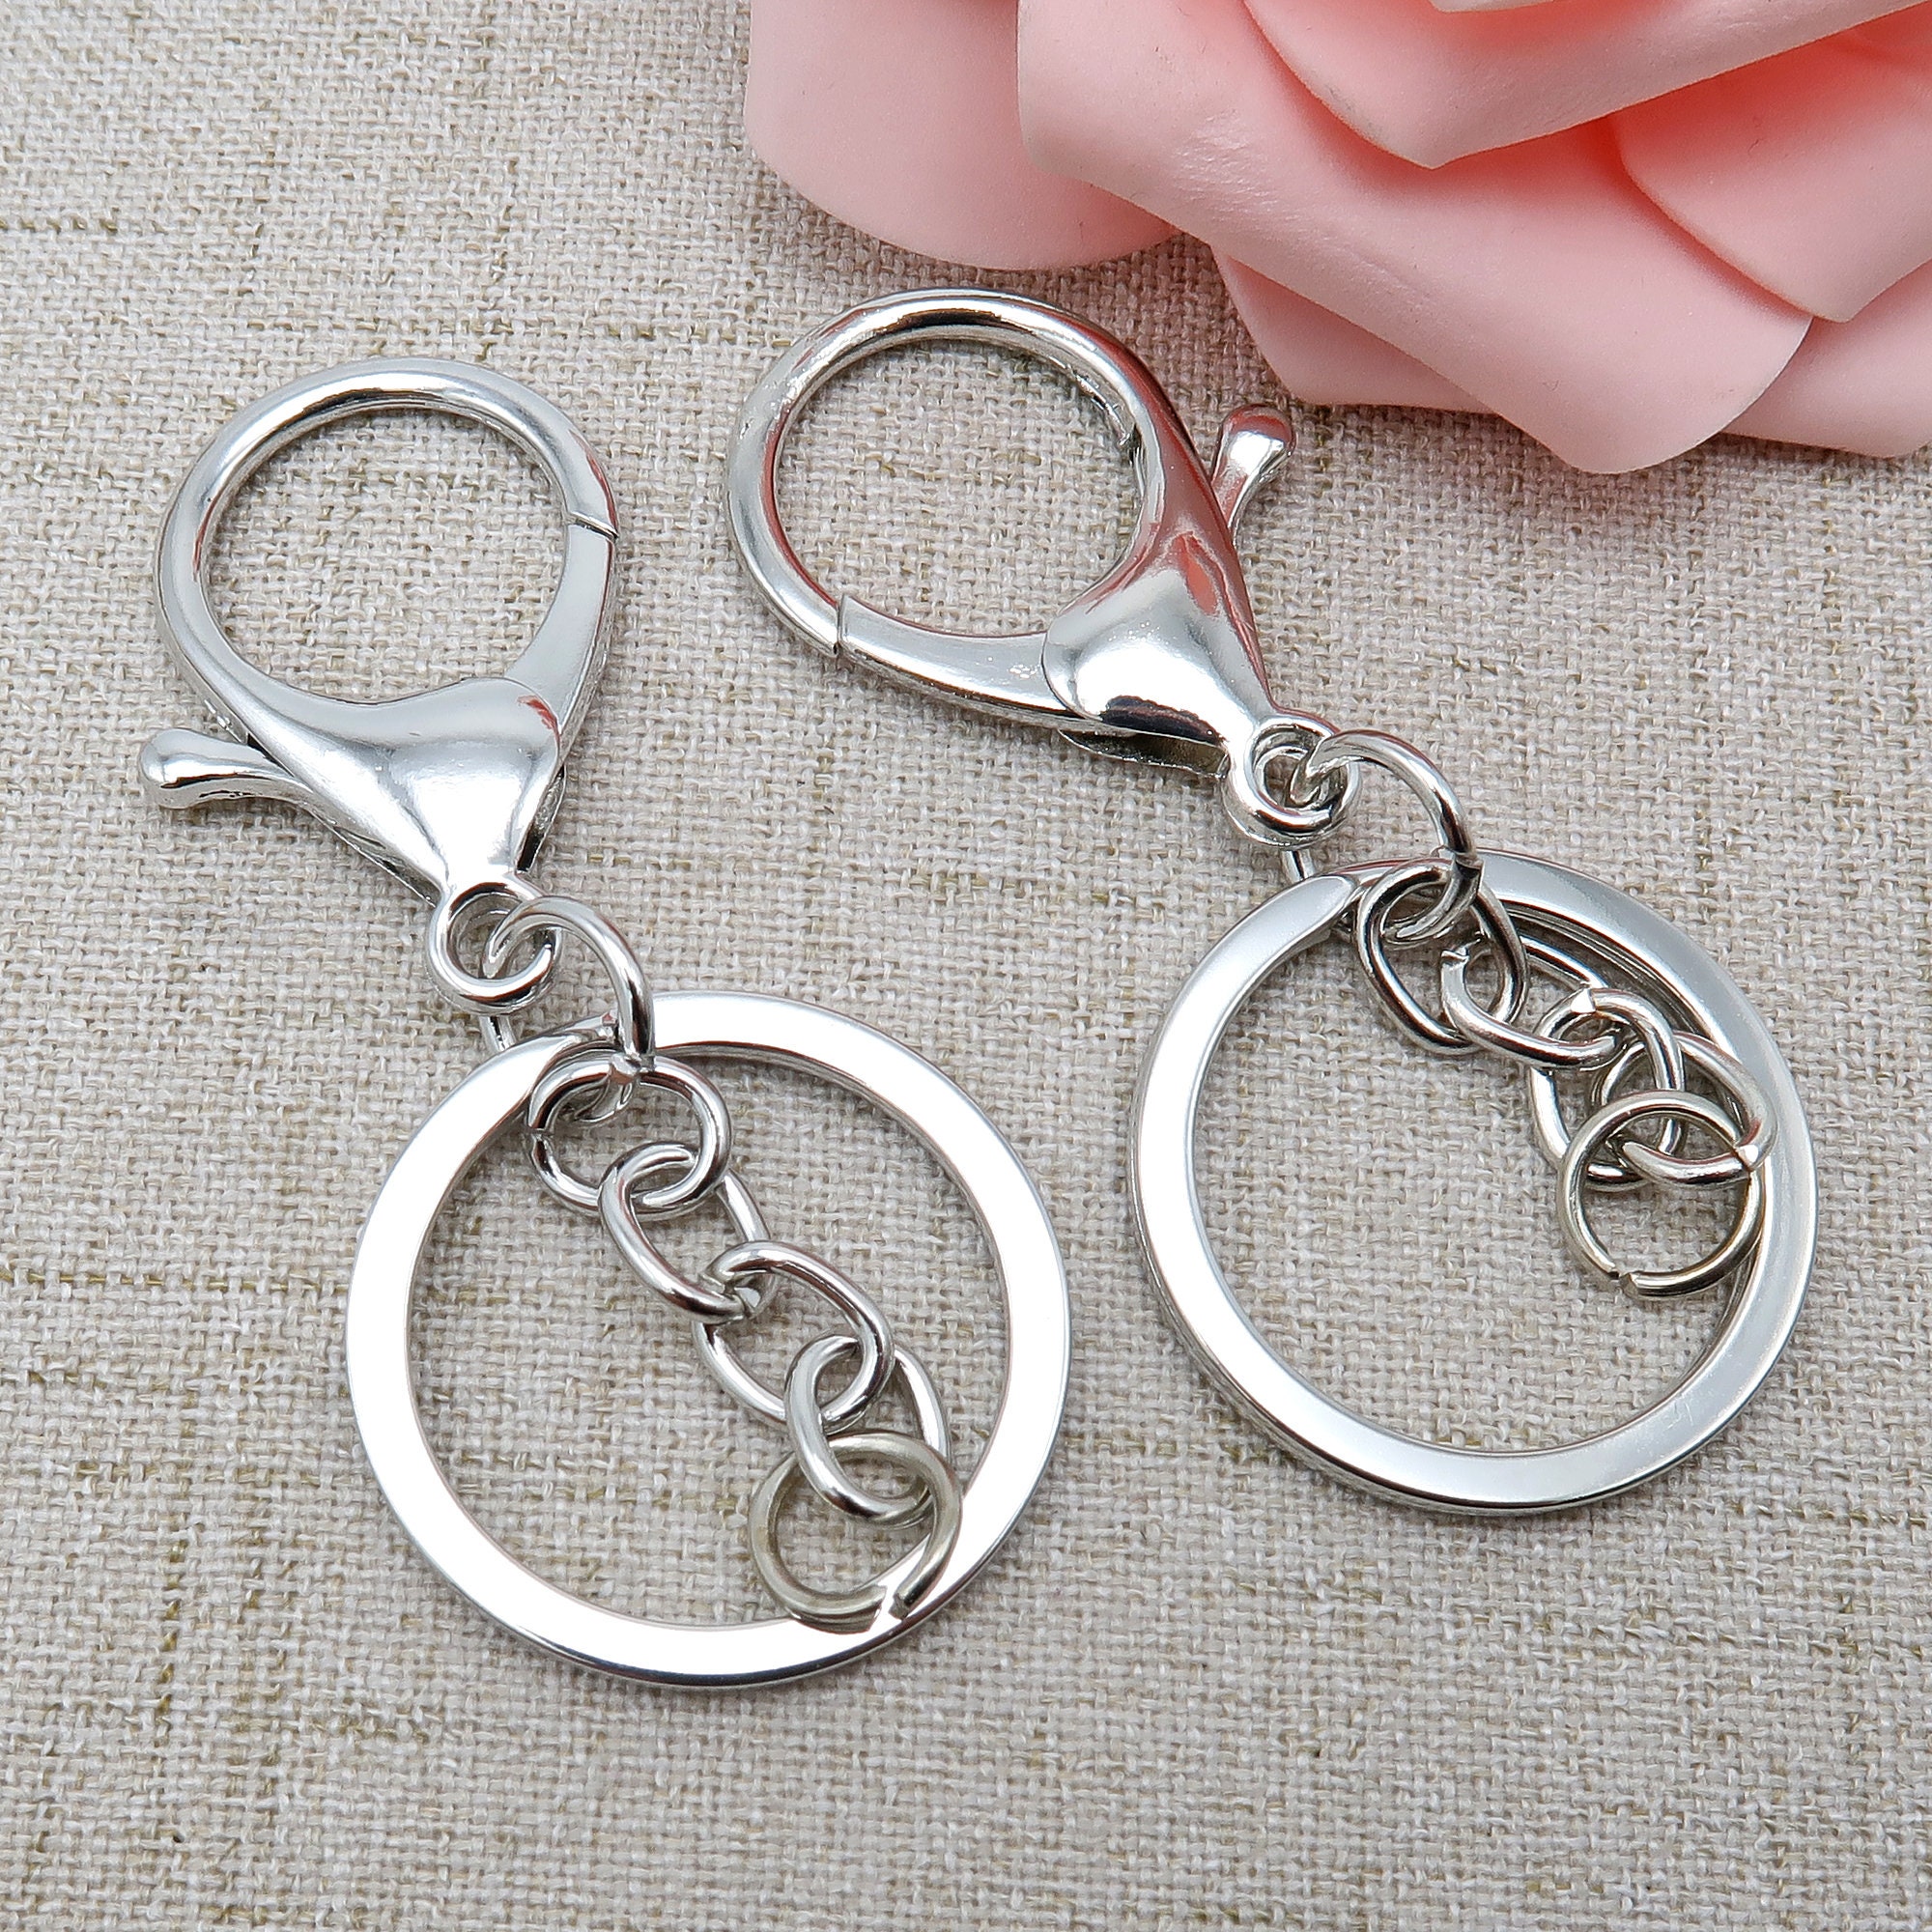 Honbay Pack of 20 Zinc Alloy Key Chain Ring with Lobster Clasps and Extension Chain, Key Ring Loop Key Holders with Flat Split Ring and Chain